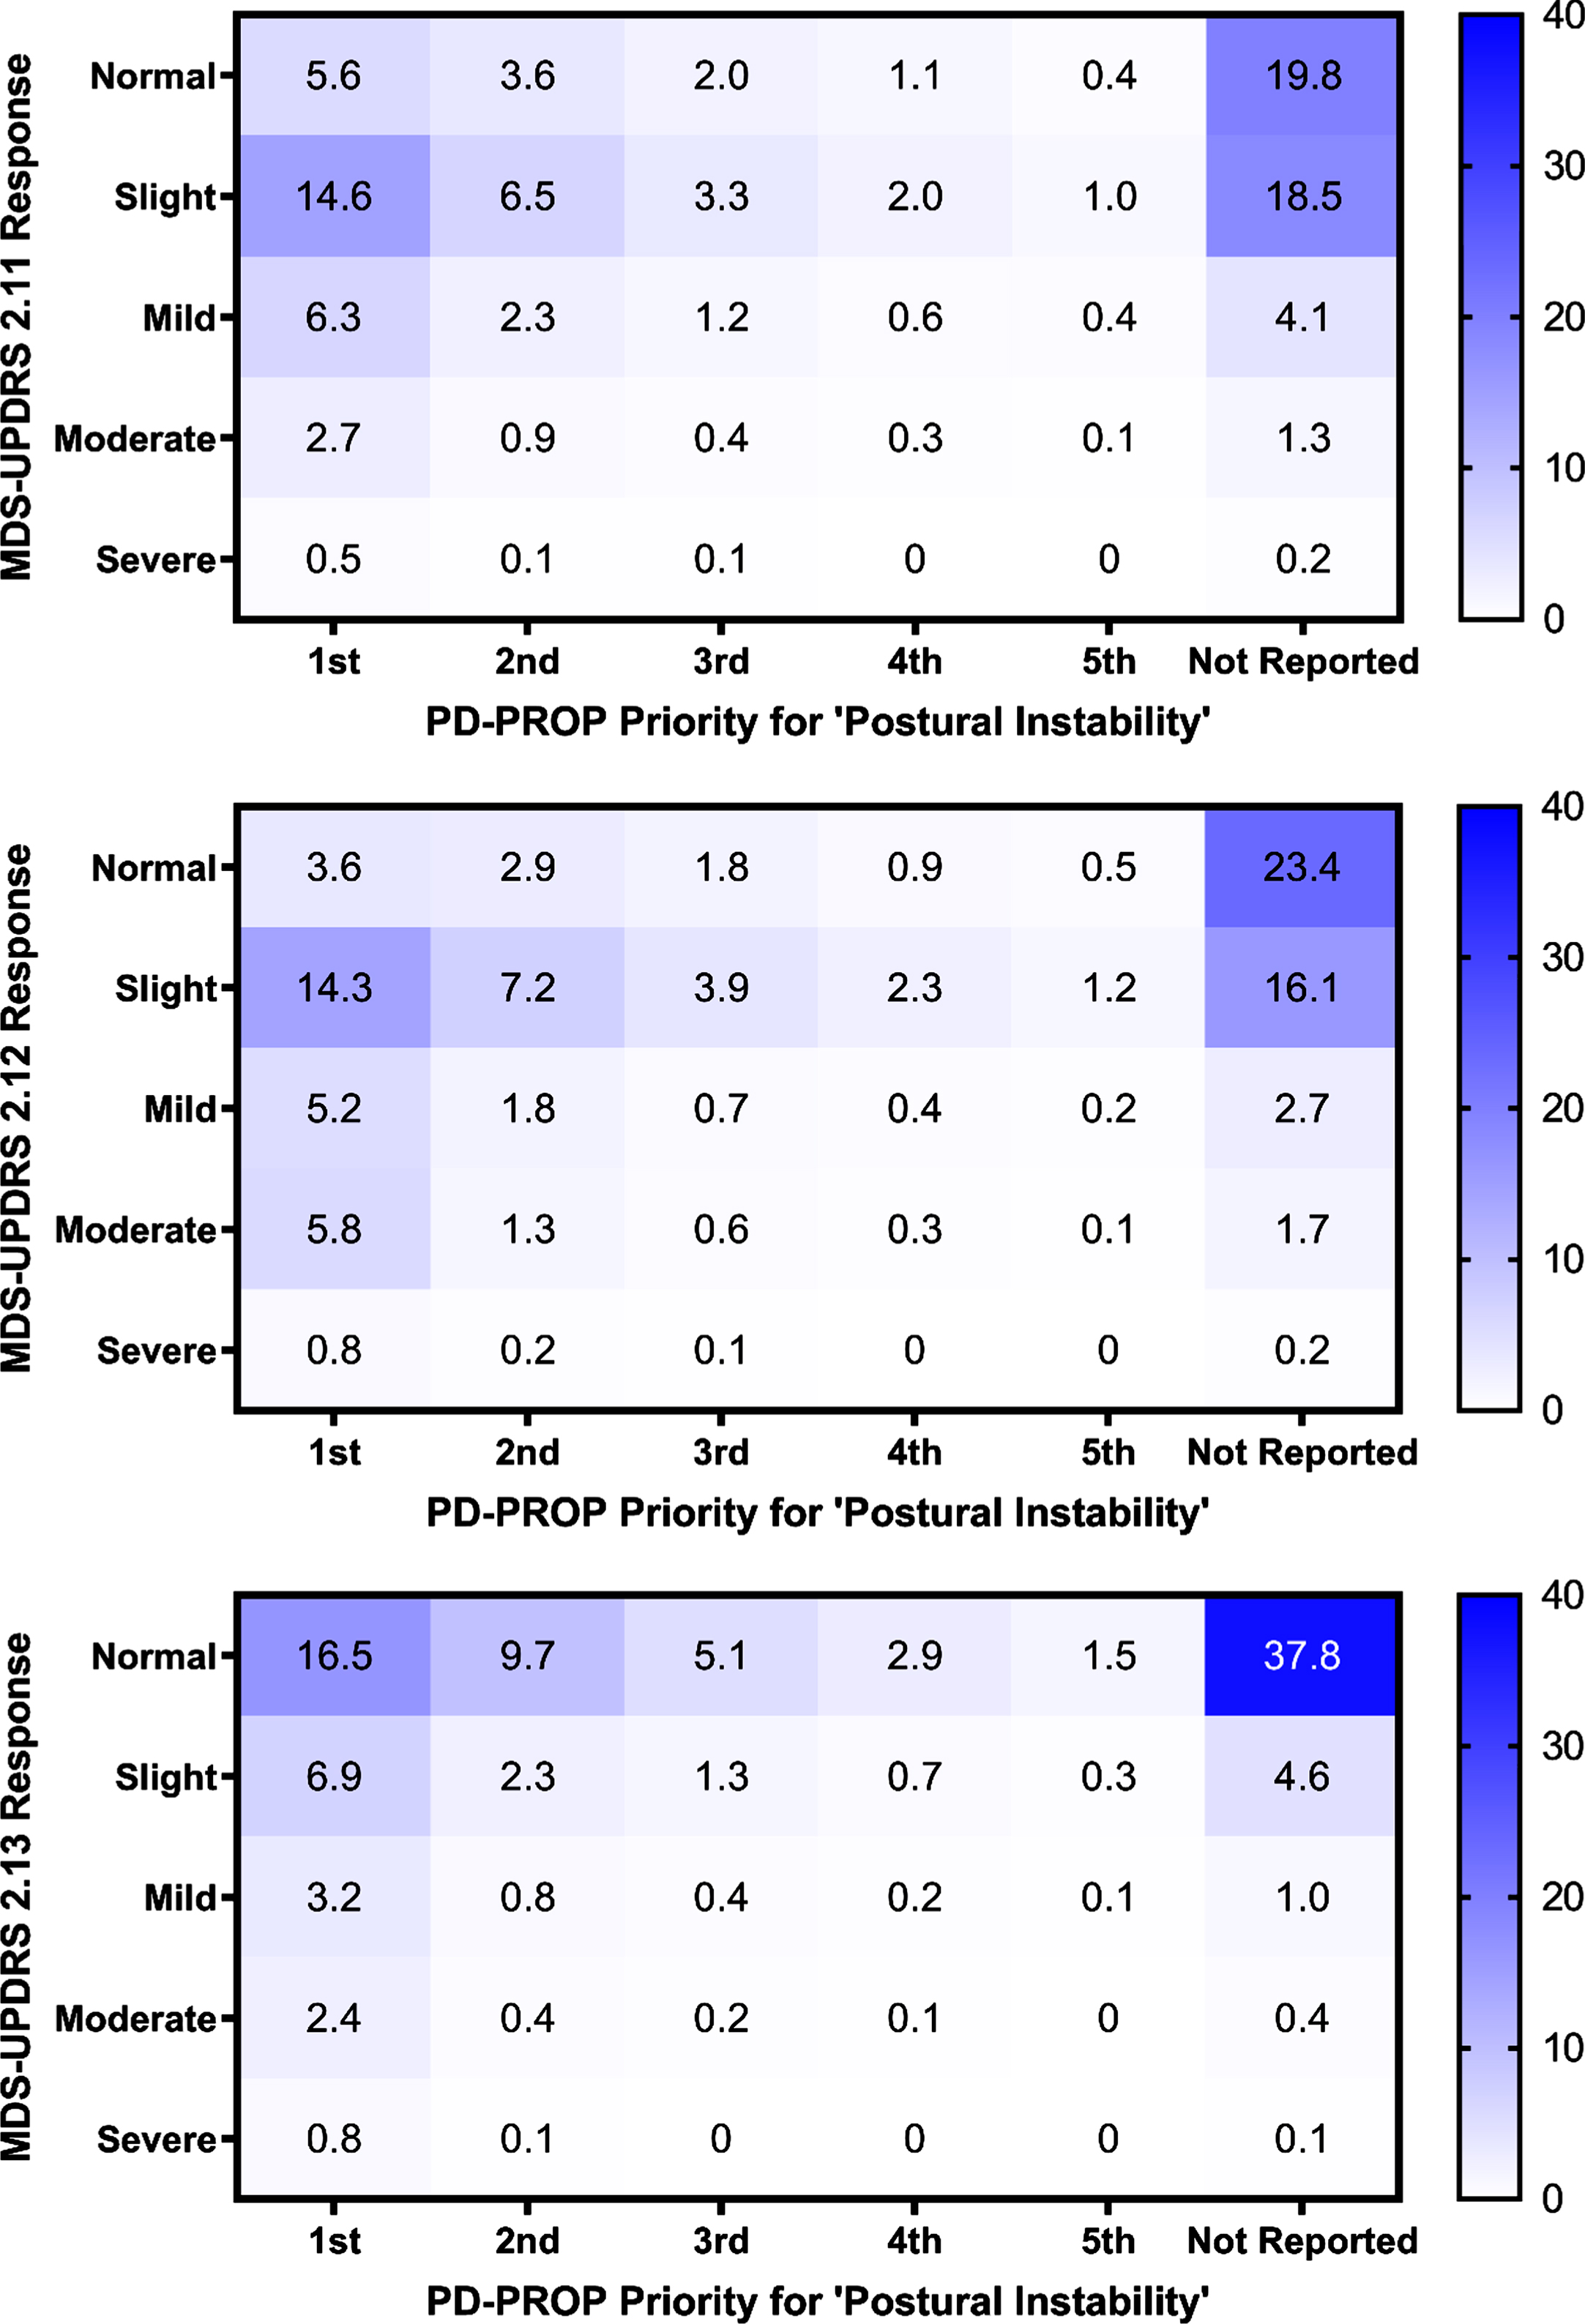 Heat maps of baseline postural instability reporting and responses to MDS-UPDRS 2.11 (rising up), 2.12 (balance & walking), and 2.13 (freezing) questions. Heat maps show participant baseline postural instability priority and corresponding MDS-UPDRS 2.11–2.13 responses, as a percentage of total participates n = 17,297. A darker color indicates a higher percentage of participants. The strongest intersections were at normal (MDS-UPDRS) and not reported (PD-PROP).